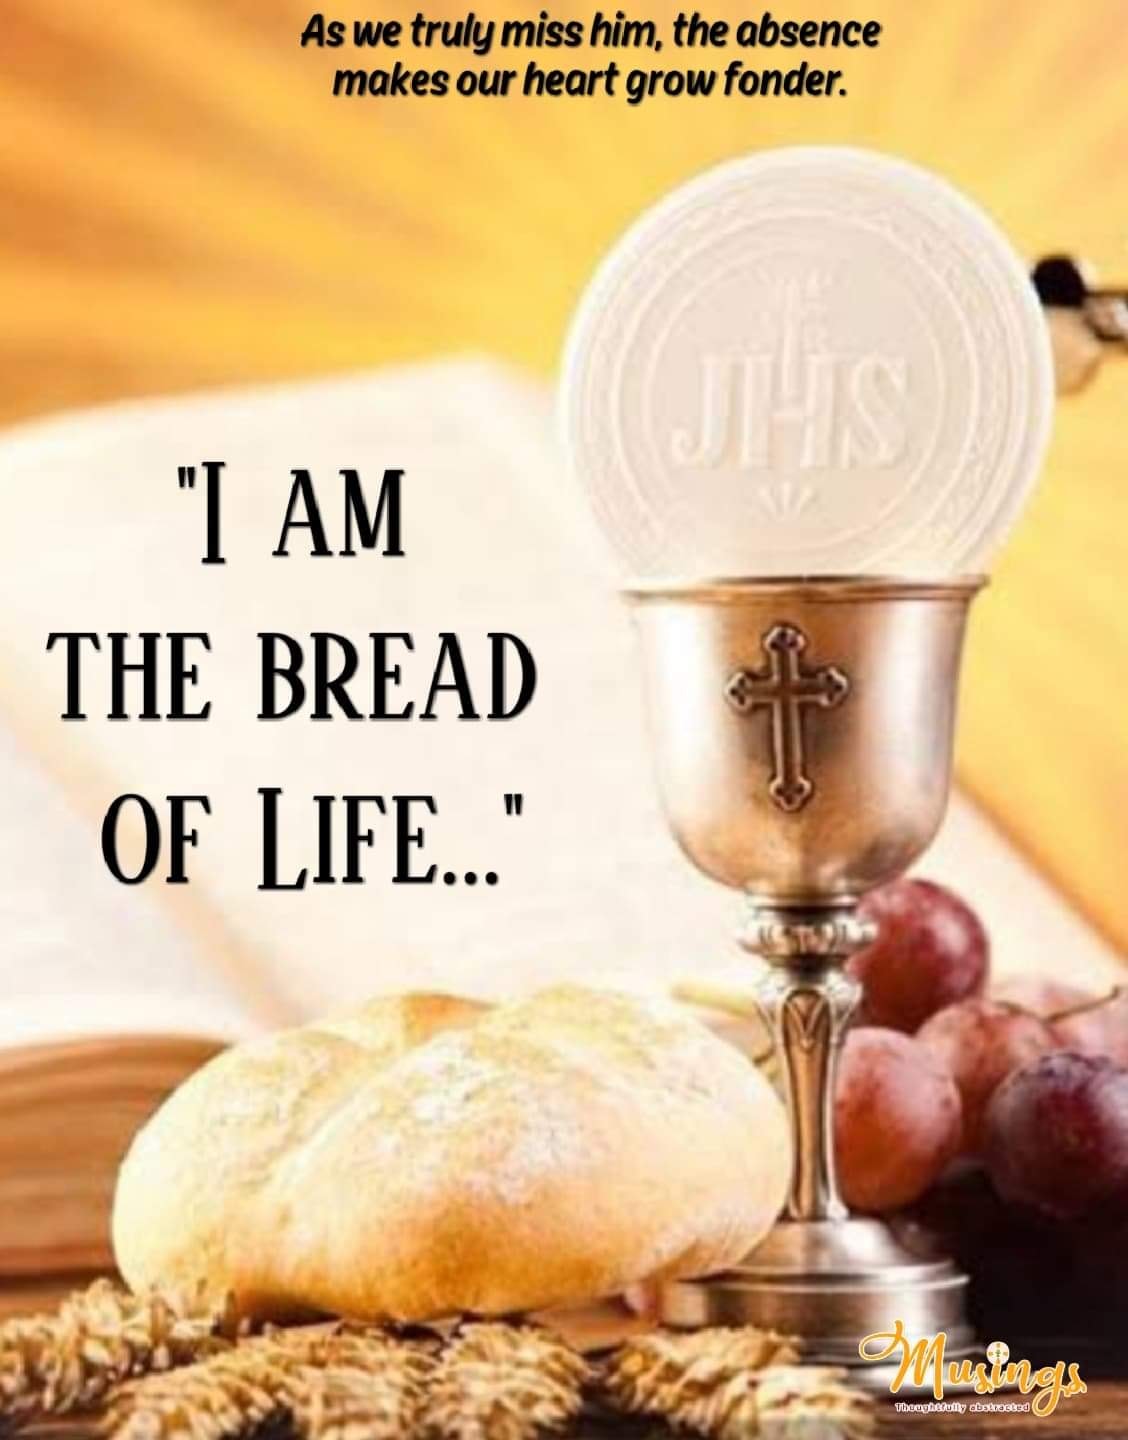 "I AM THE BREAD OF LIFE..."